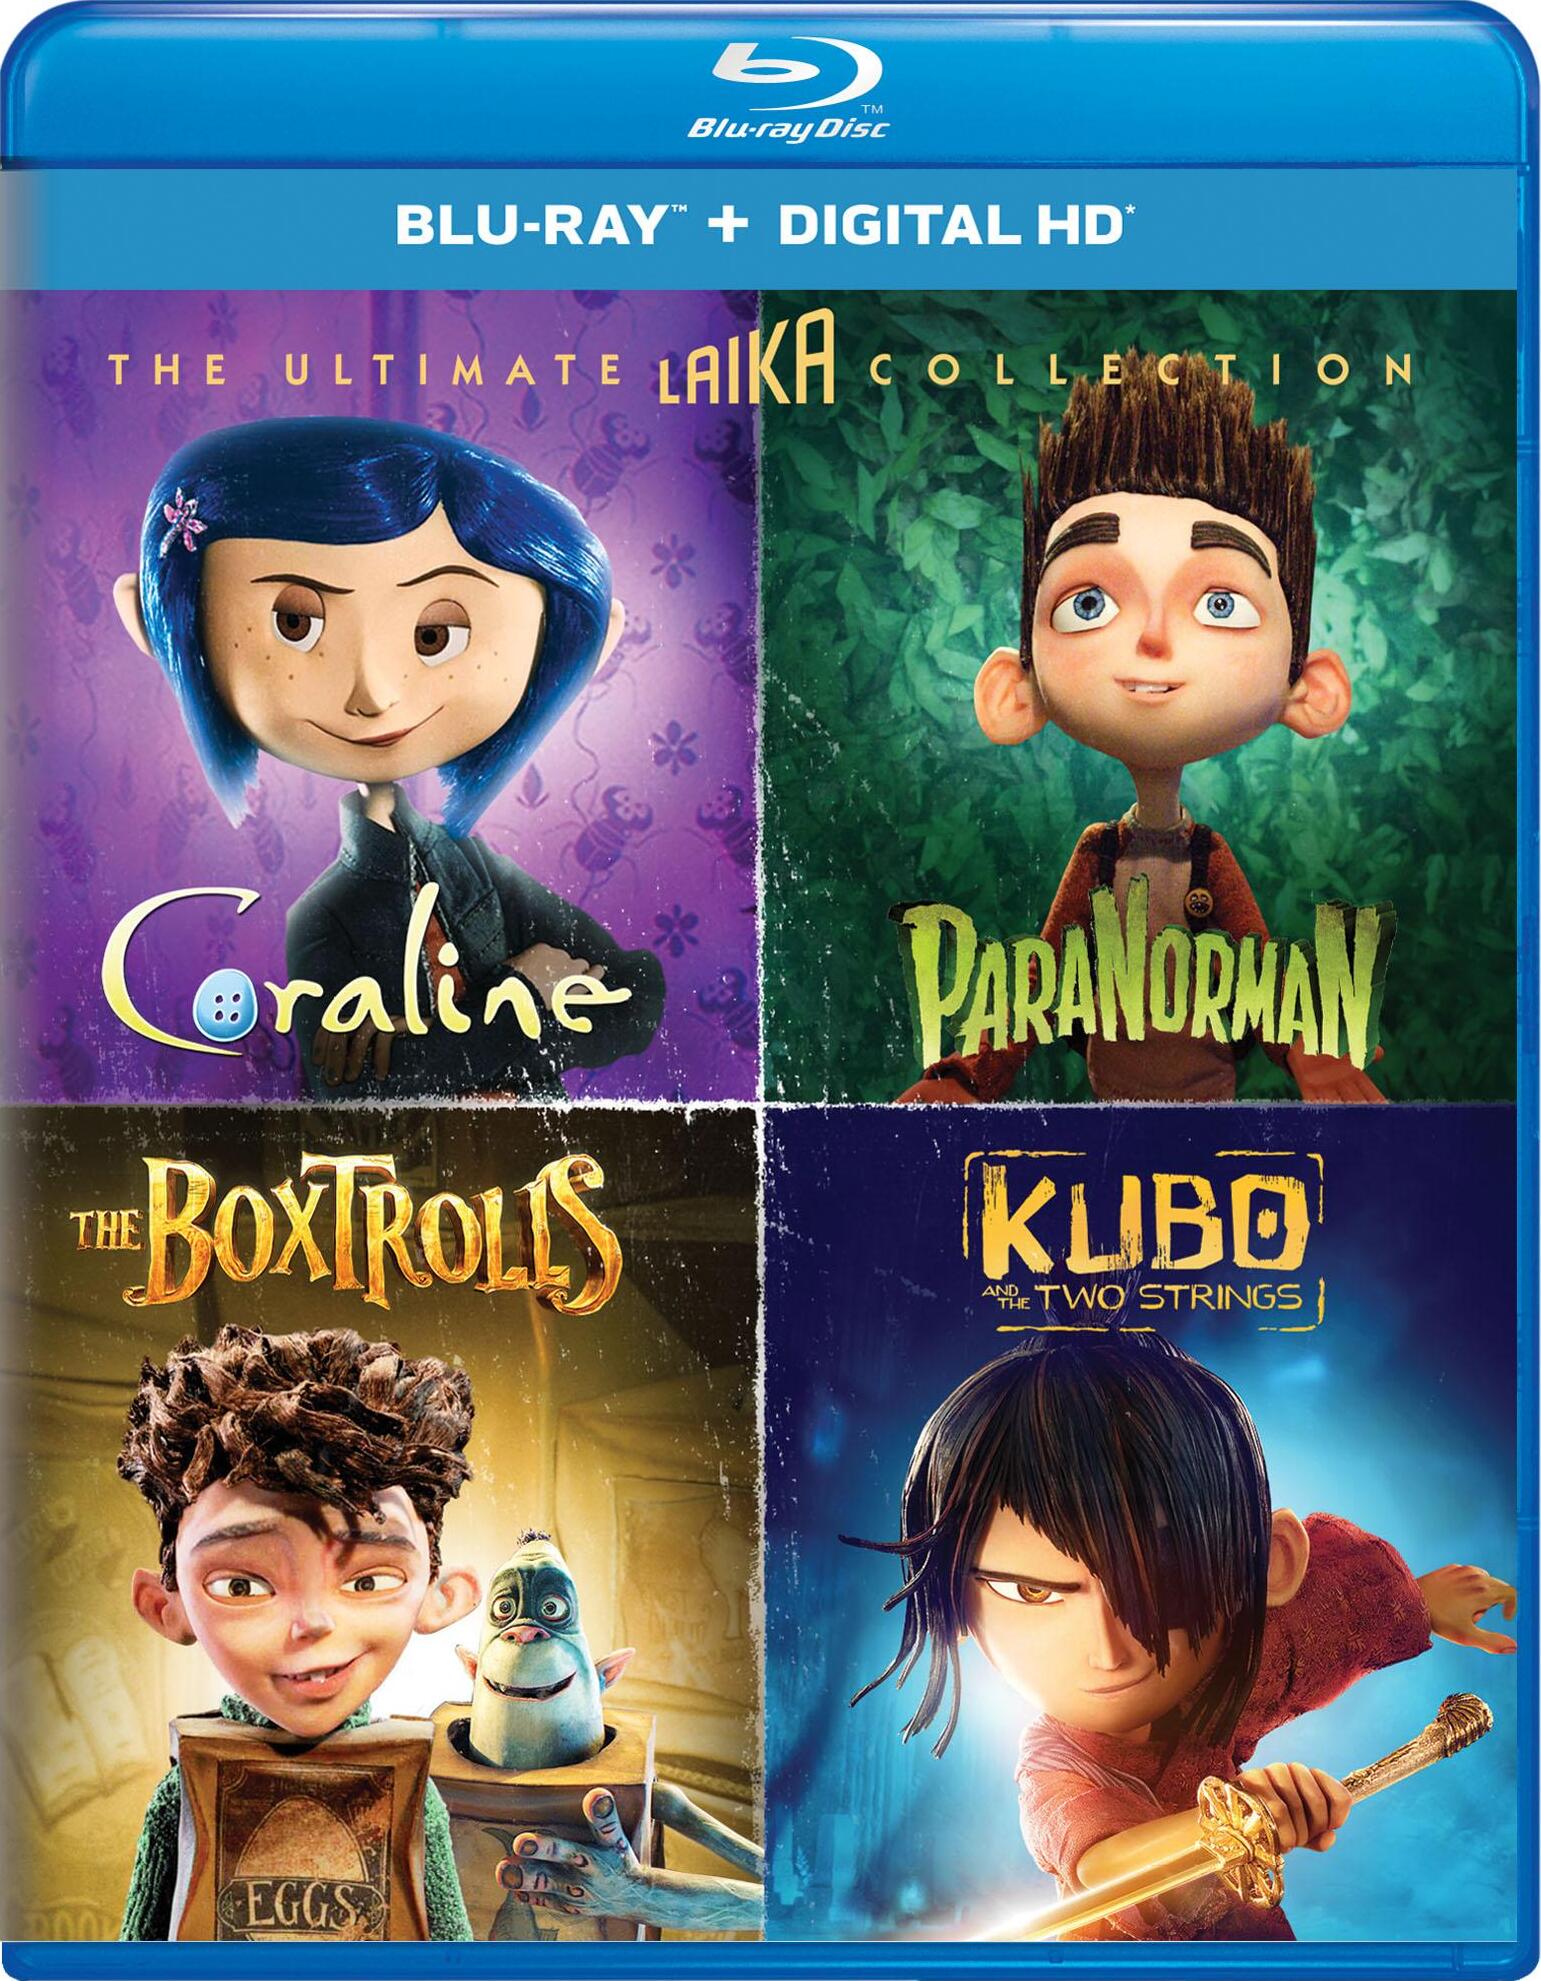 THE ULTIMATE LAIKA COLLECTION BLU-RAY [PRE-ORDER]